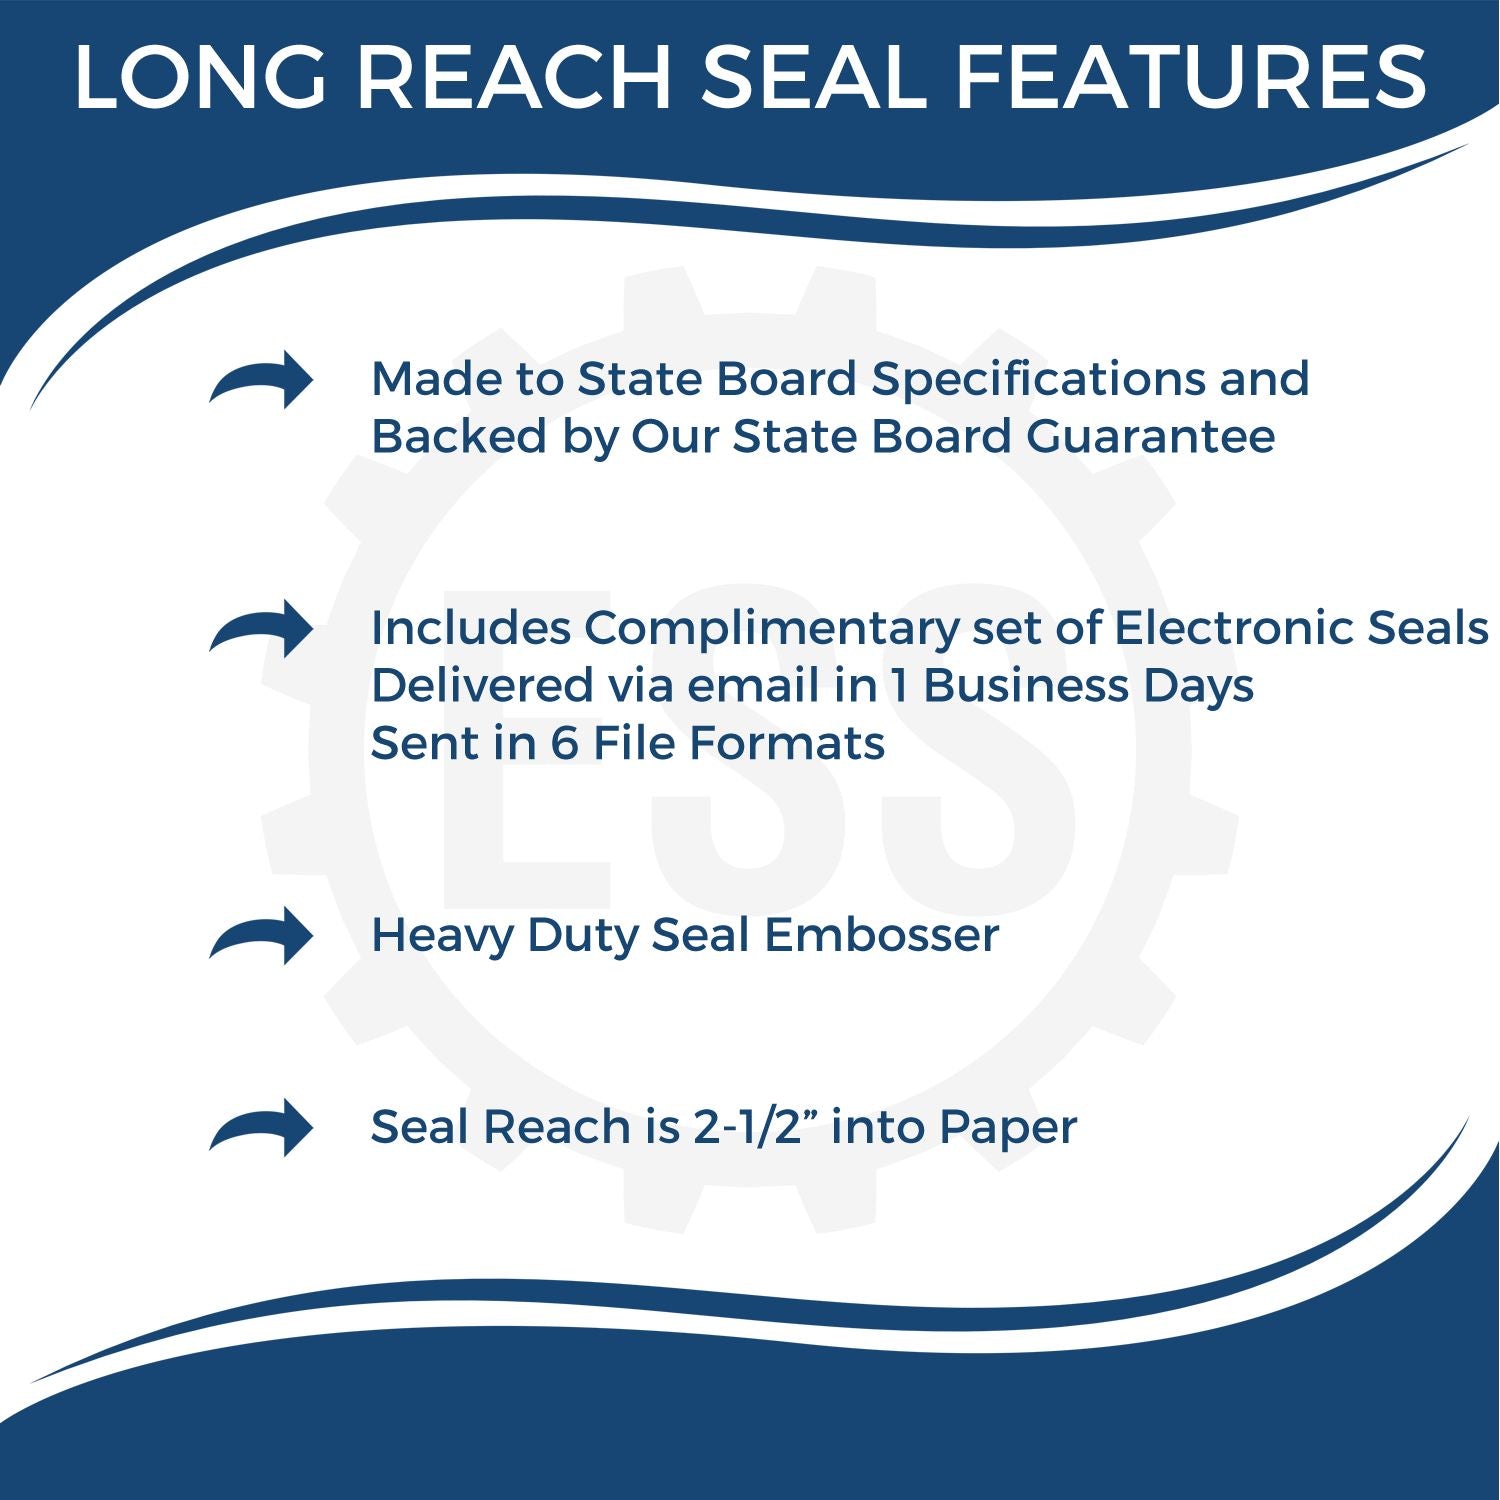 The main image for the Long Reach Arizona PE Seal depicting a sample of the imprint and electronic files